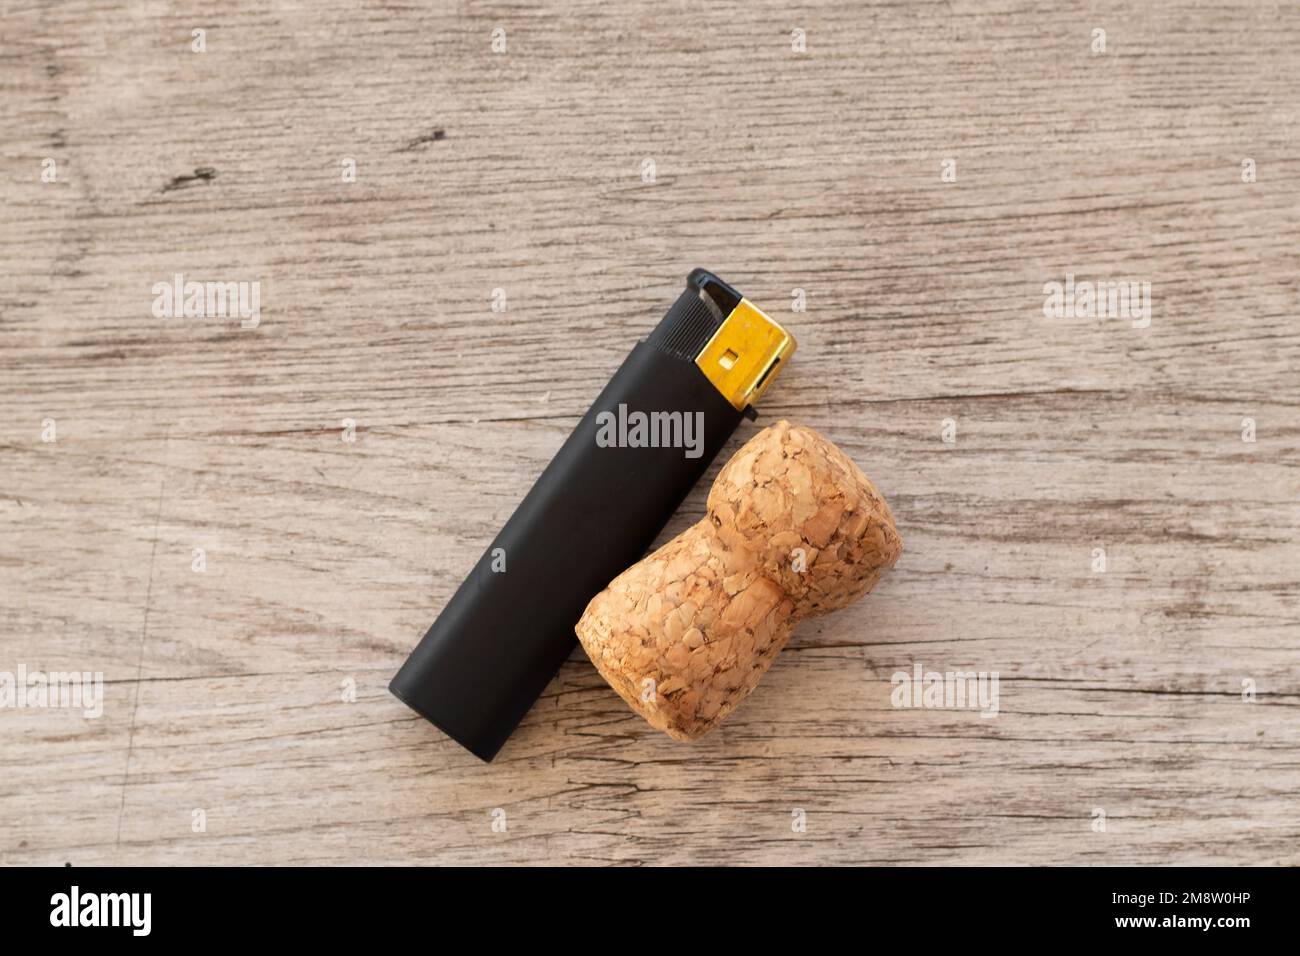 lighter and wine cap on a wooden table Stock Photo